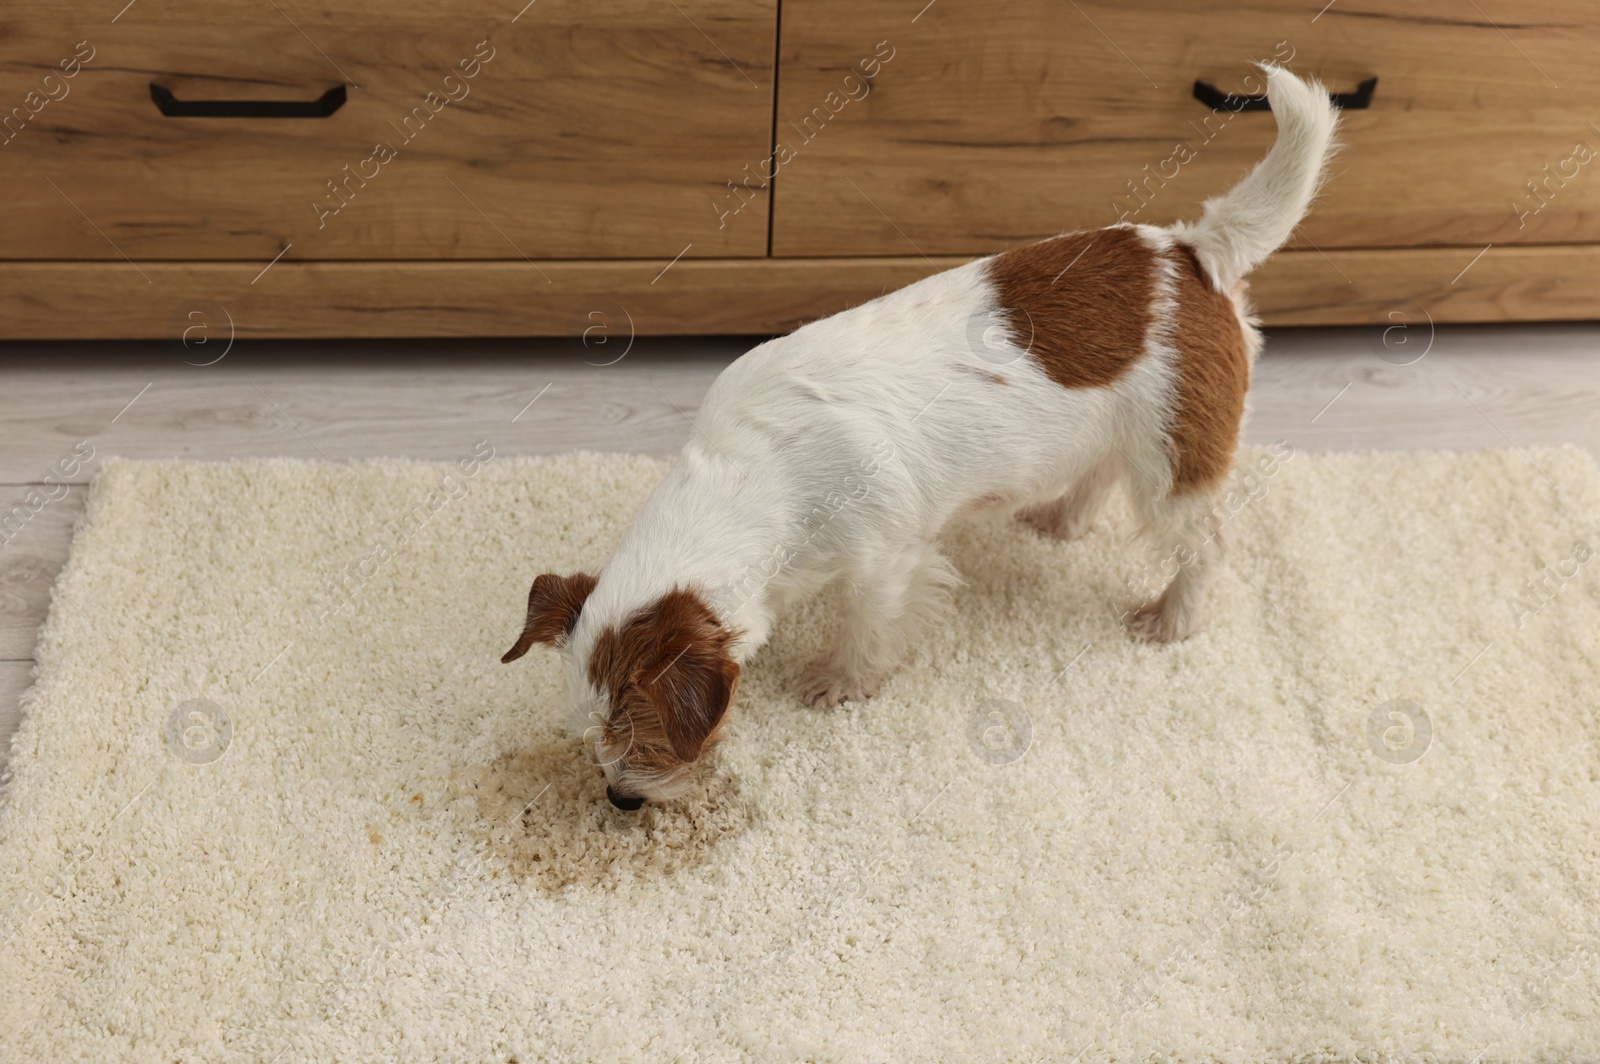 Photo of Cute dog near wet spot on rug indoors